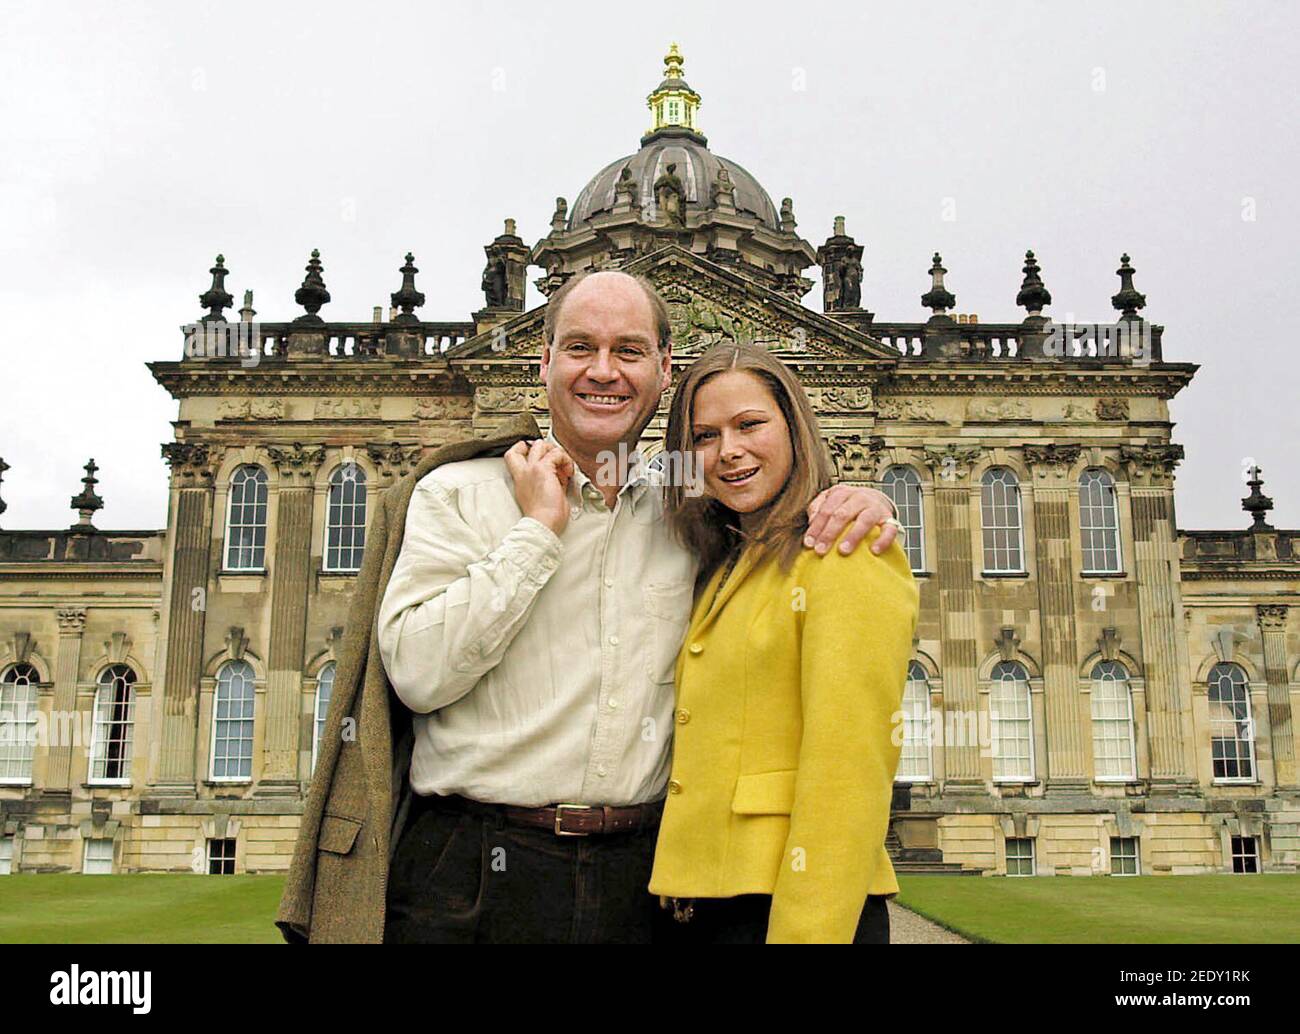 File photo dated 4/5/2001 of the Hon Simon Howard and his bride-to-be Rebecca Sieff outside Castle Howard, after announcing their wedding plans. Howard, who ran the stately home made famous in two major TV series for more than 30 years, has indicated in court that he will plead not guilty to charges of child sex offences. Issue date: Monday February 15, 2021. Stock Photo